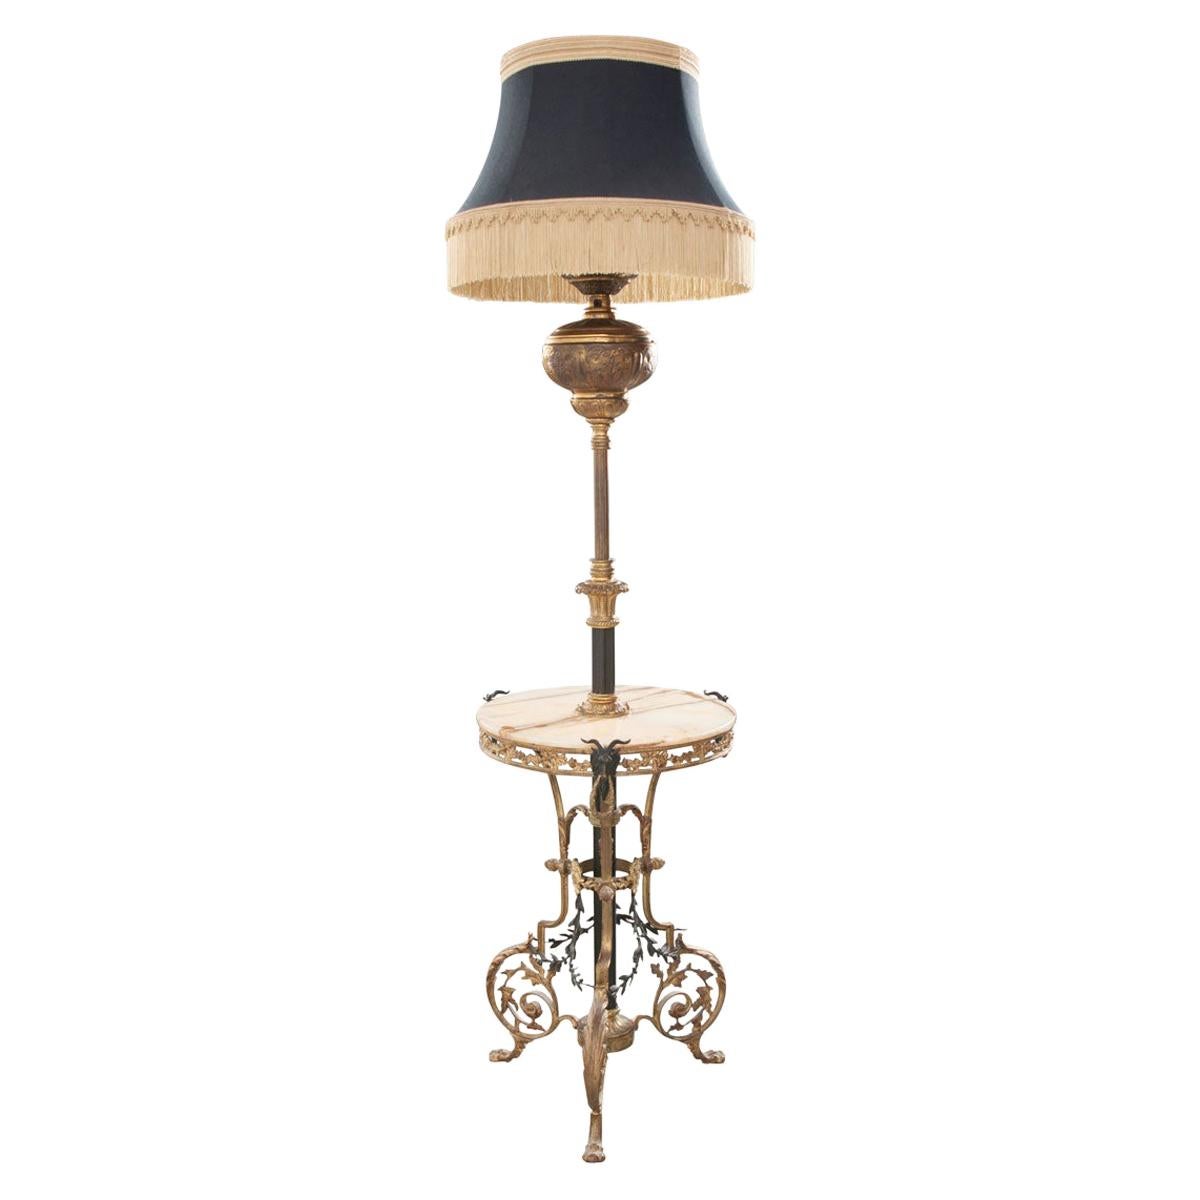 Victorian 19th Century Lamp and Table